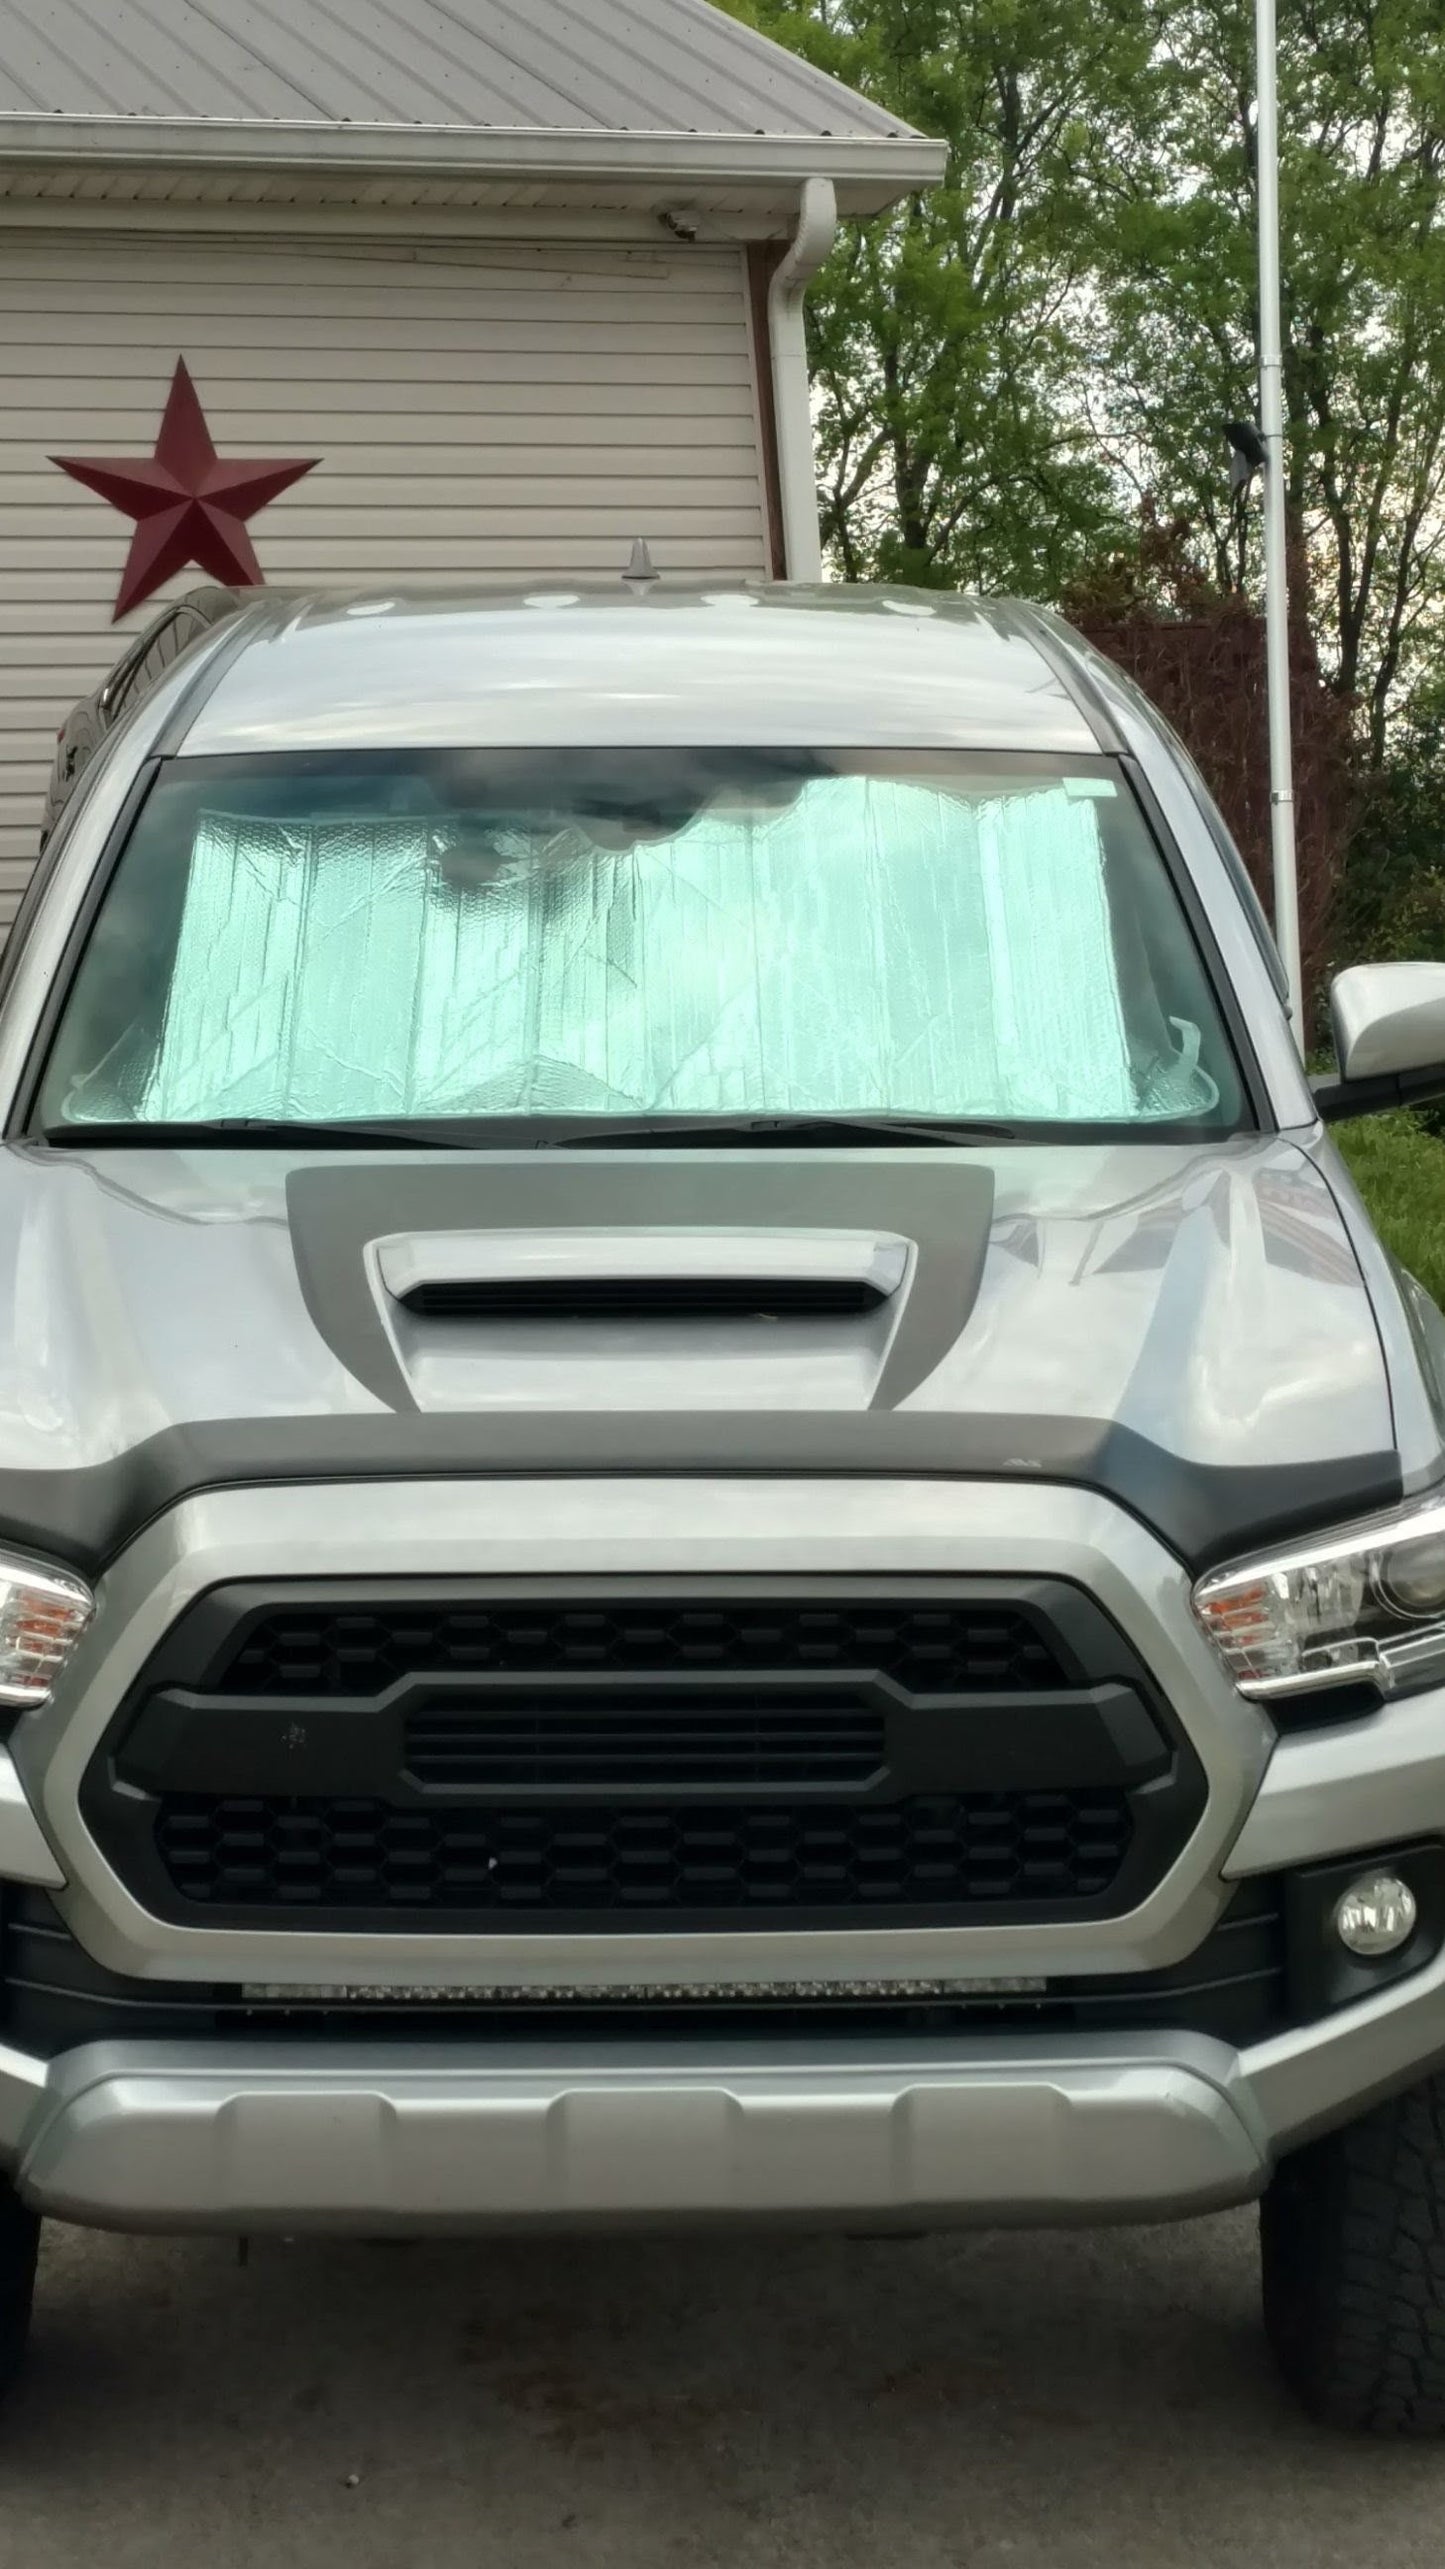 MATTE BLACK - 2016 to 2021 Tacoma Front Hood Scoop Graphic Decal Inlay